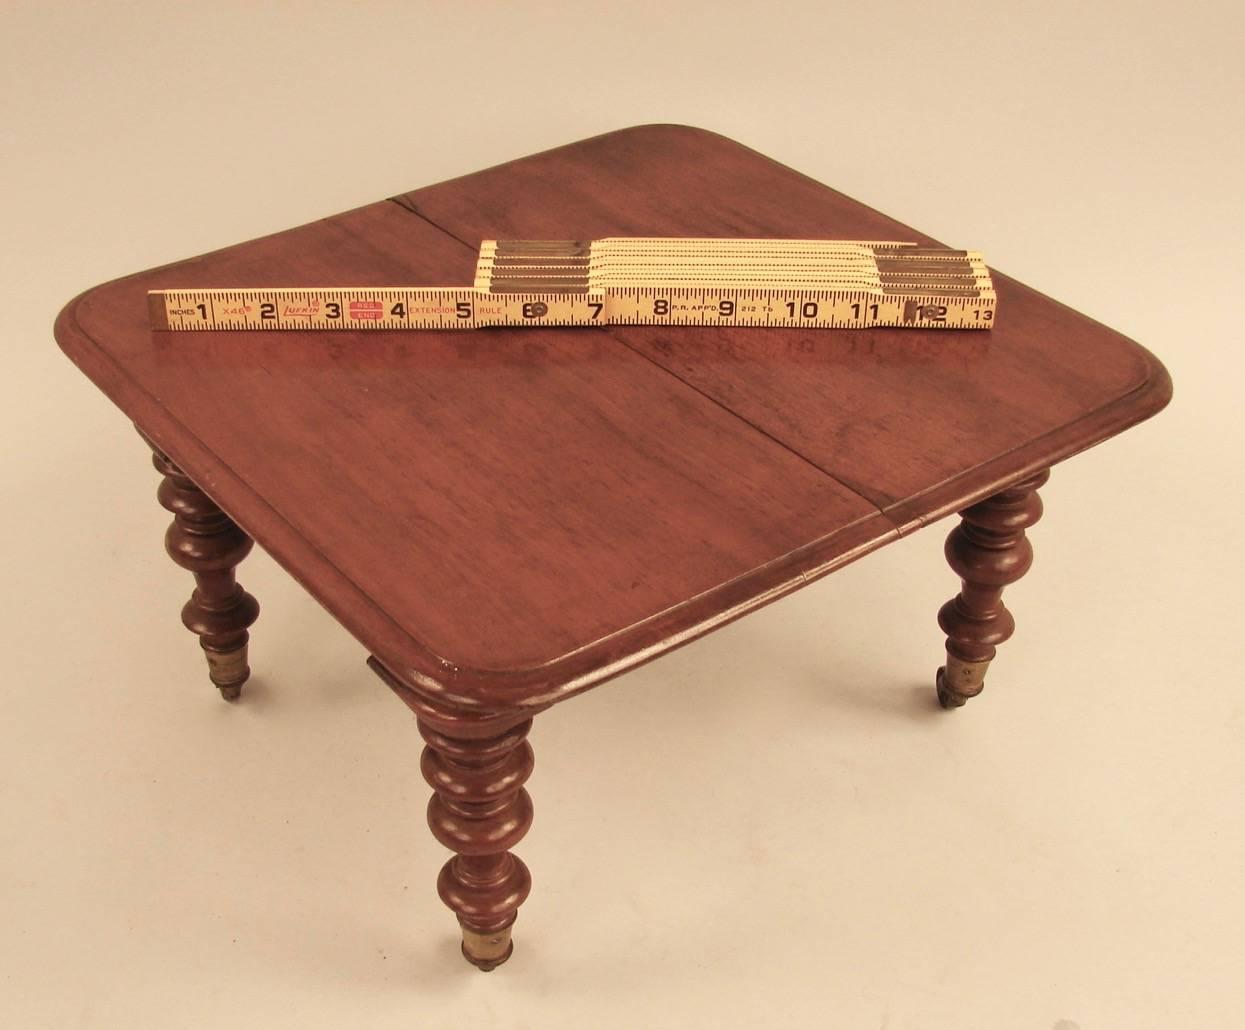 A well-crafted English Victorian salesman's sample of a mahogany 3-leaf dining table, complete with leaf holder, the table with turned legs ending in brass casters. Possibly a piece of doll house furniture.